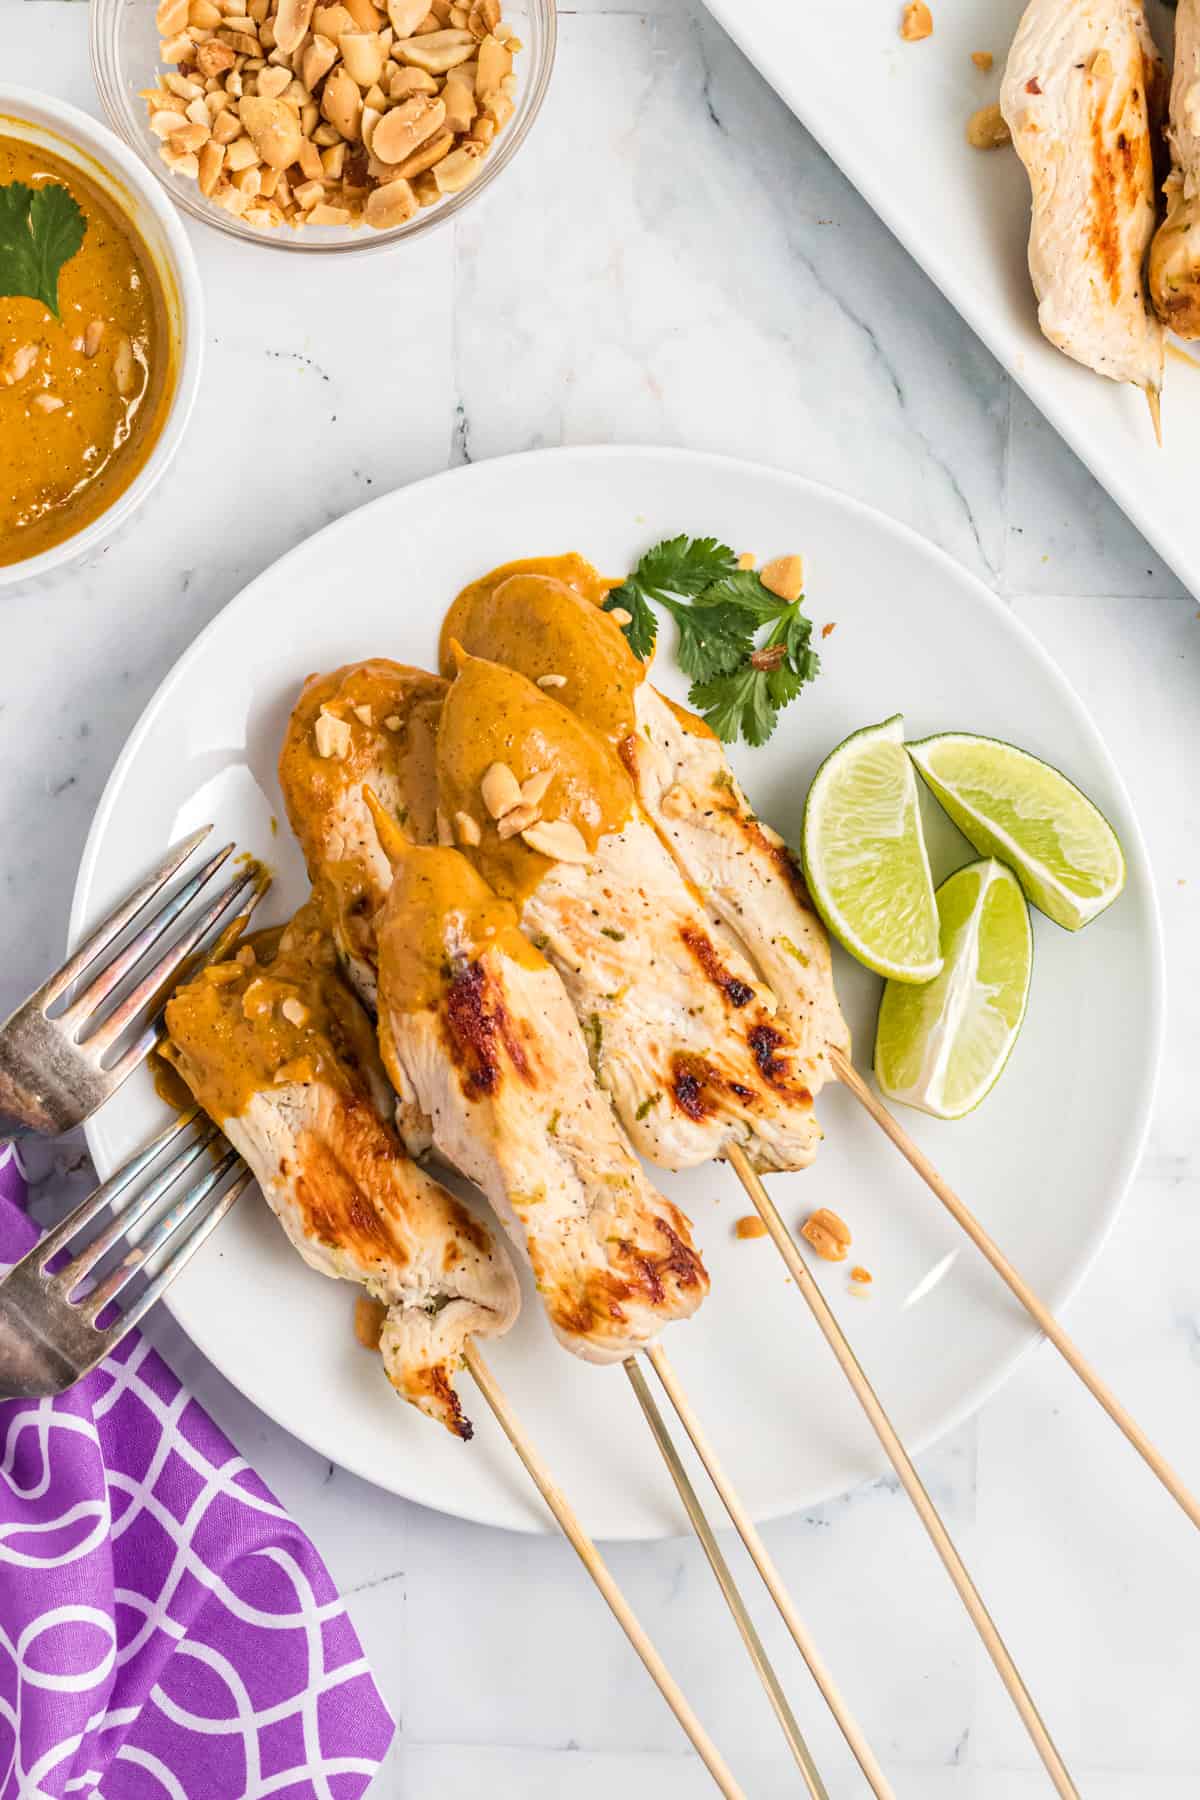 Chicken satay skewers on a white plate have been all dunked in peanut sauce and are placed next to fresh limes.